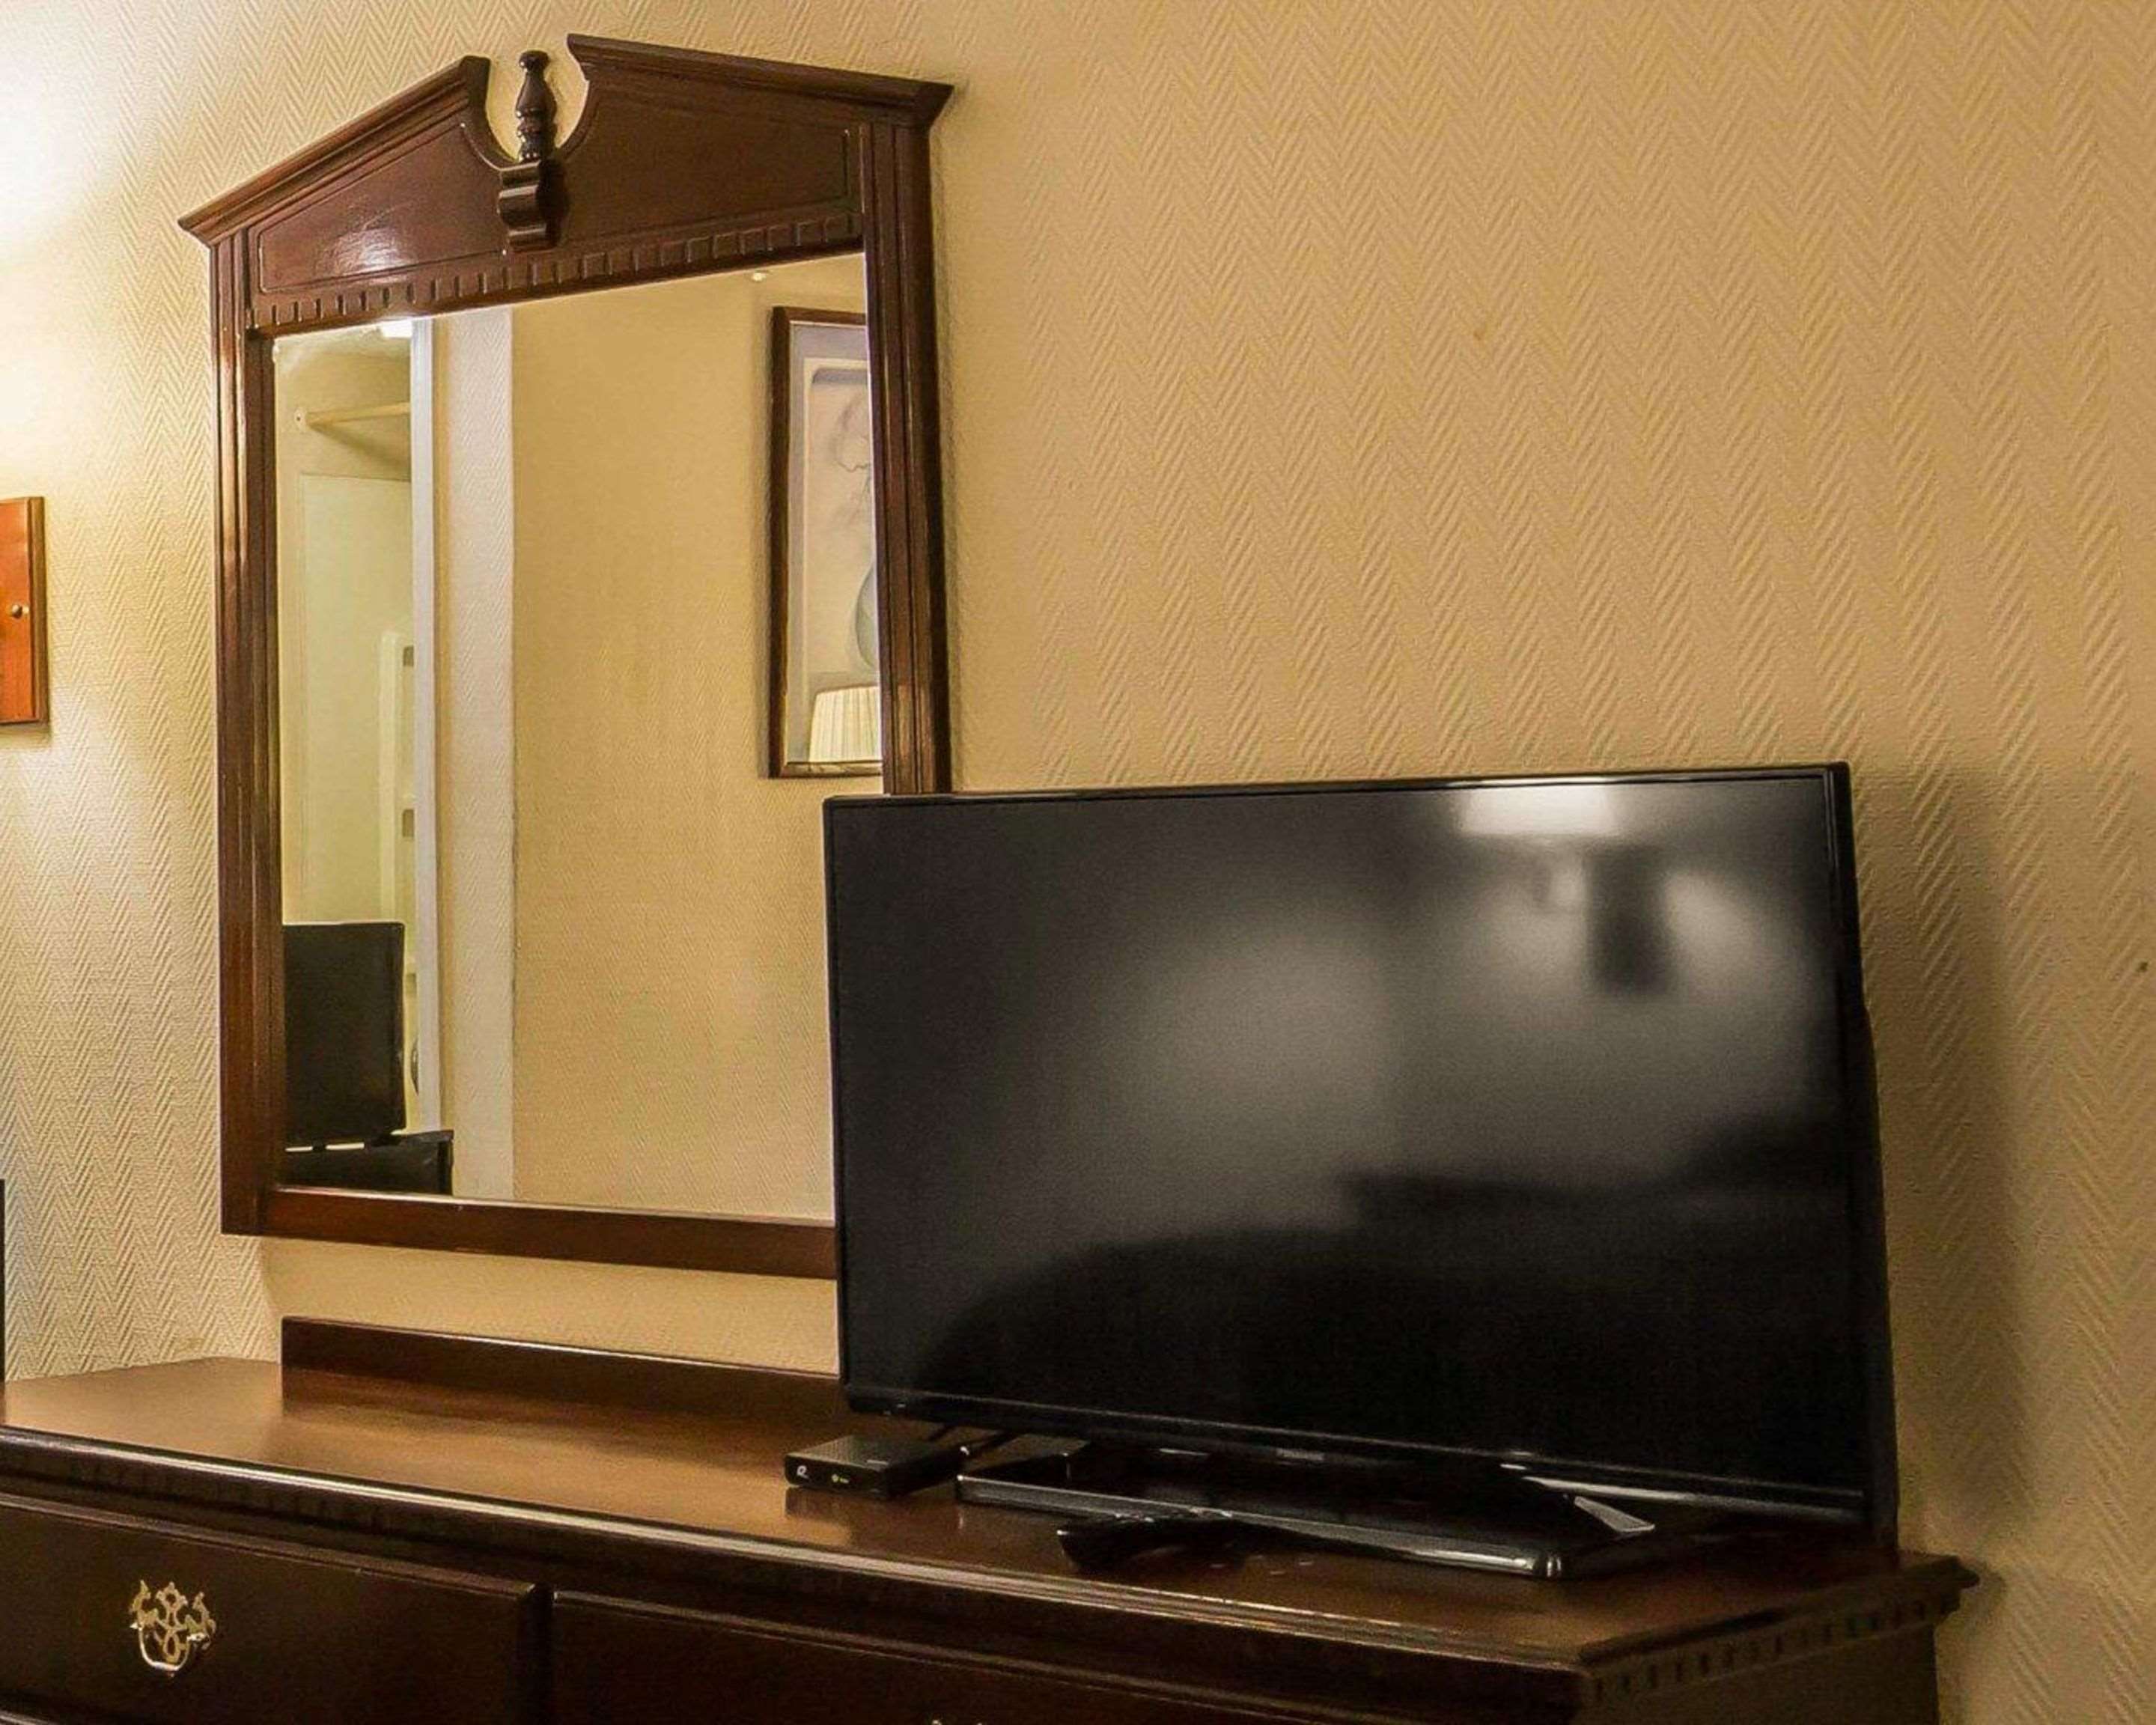 Guest room with flat-screen television